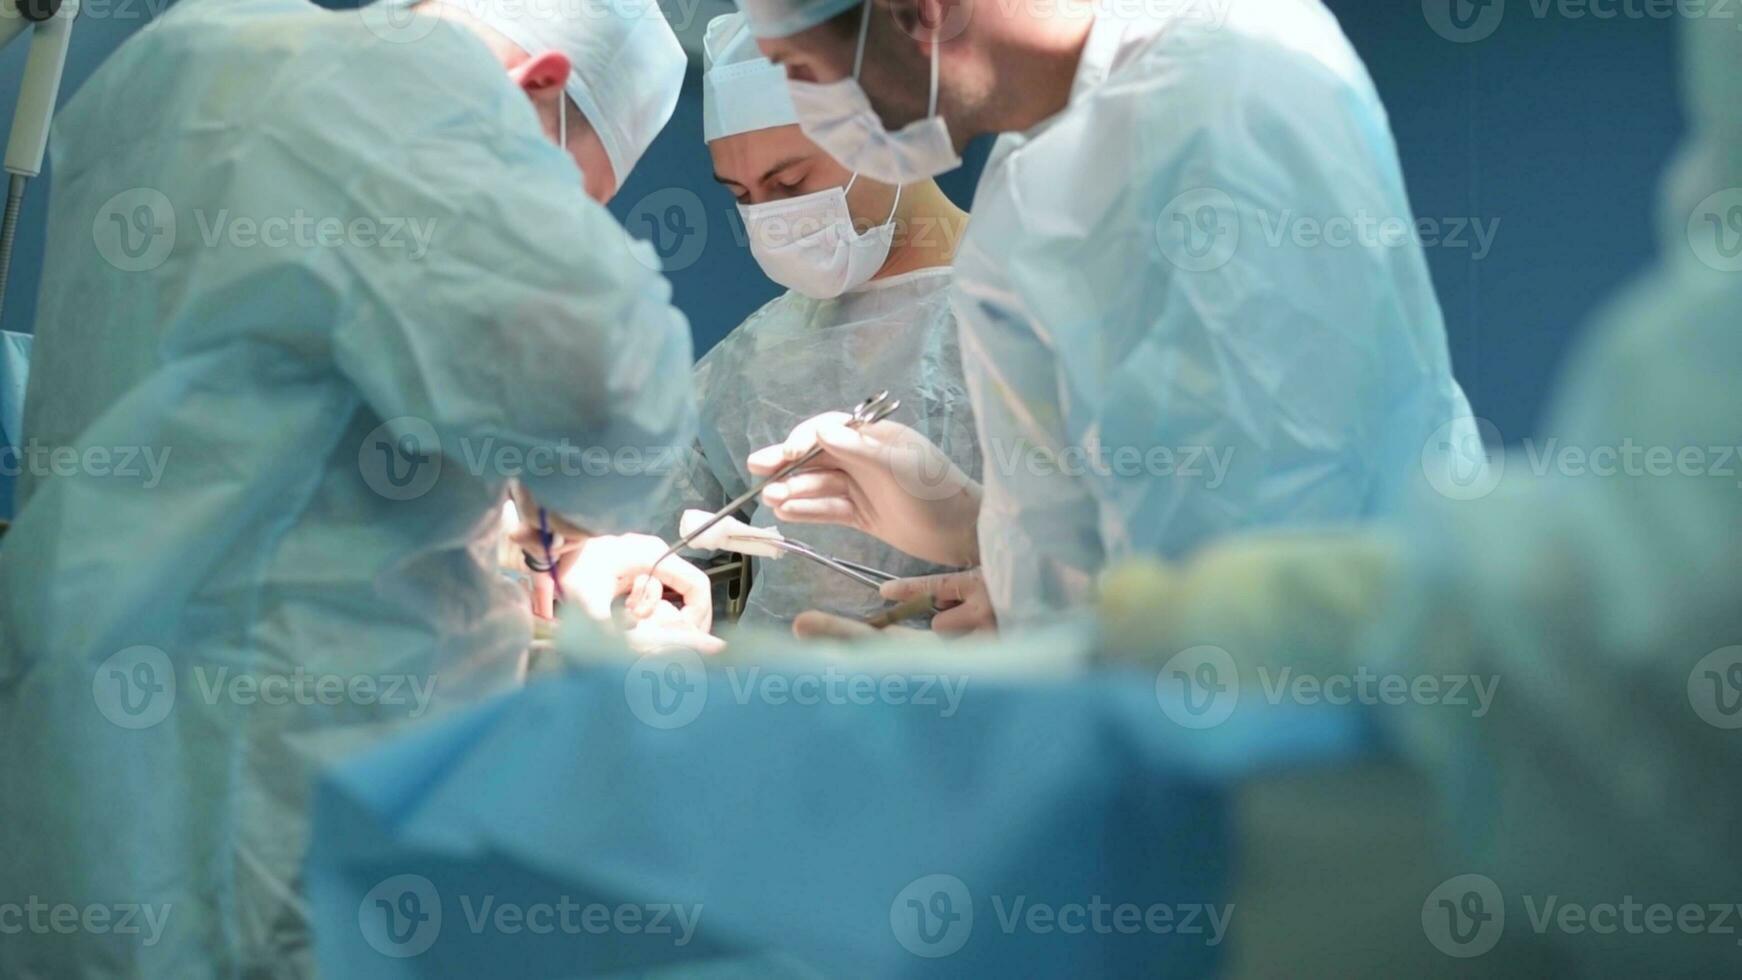 A highly qualified team of surgeons performs a complex operation to remove a pancreatic cyst using medical instruments photo